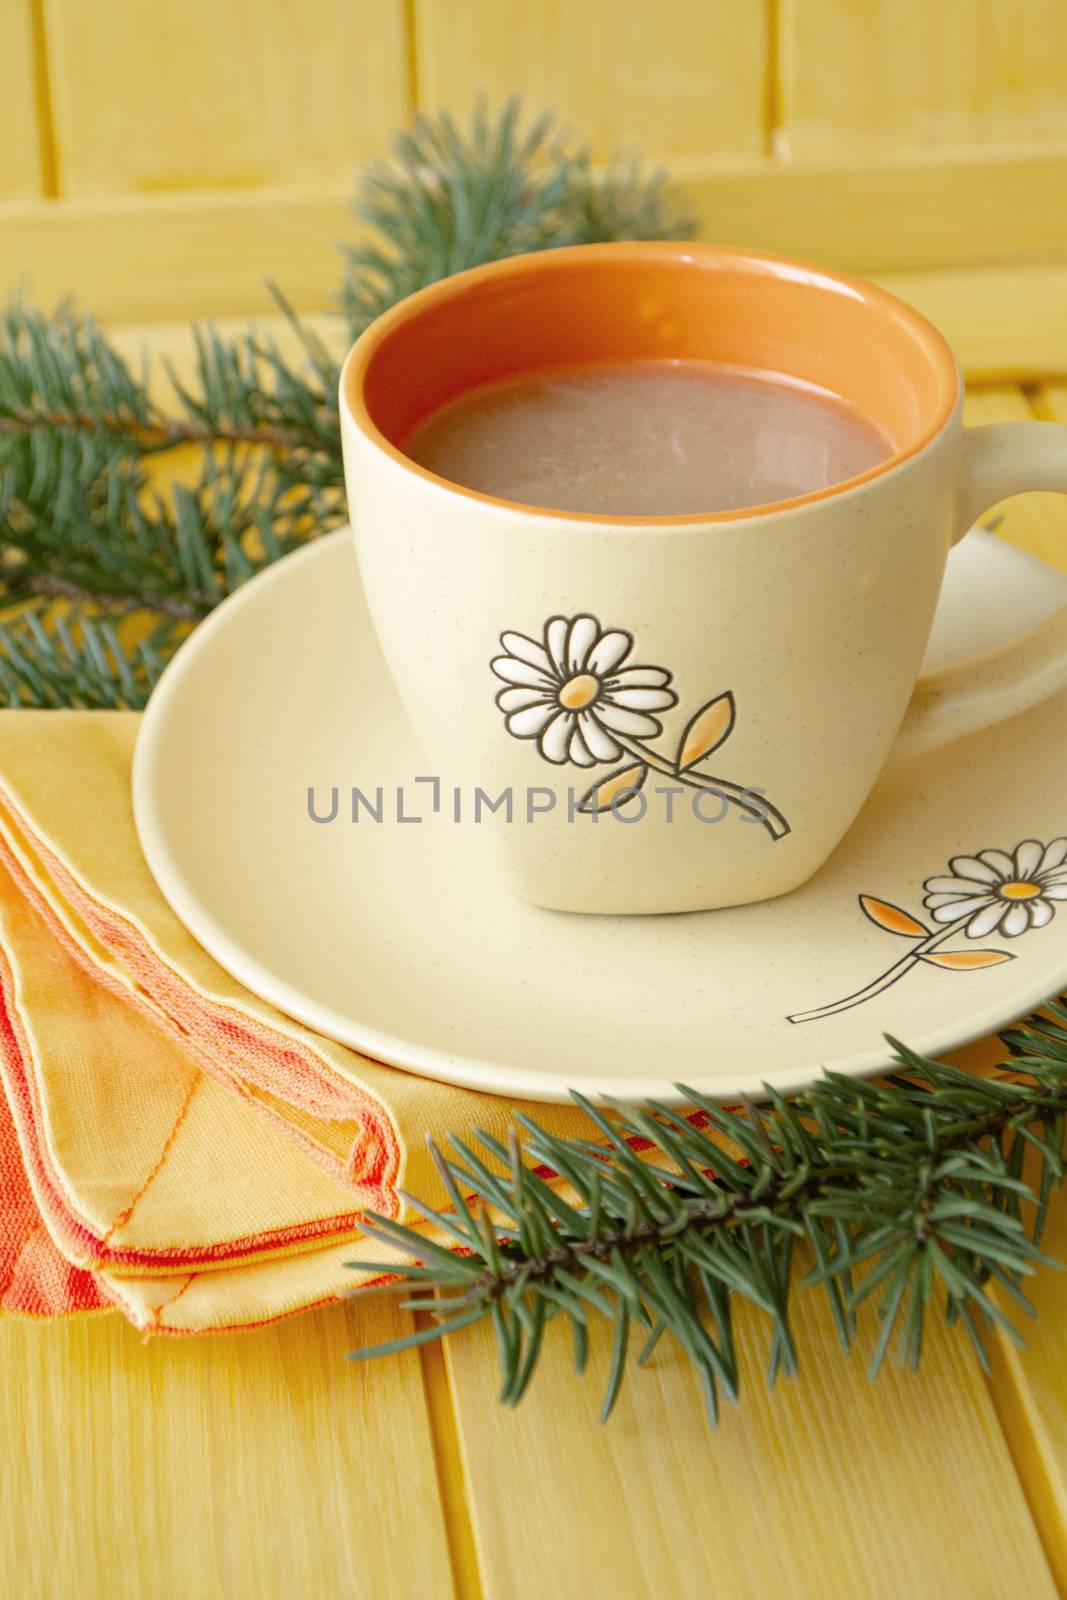 cup of hot cocoa or hot coffee latte, traditional beverage for winter time. Christmas concept, orange colors